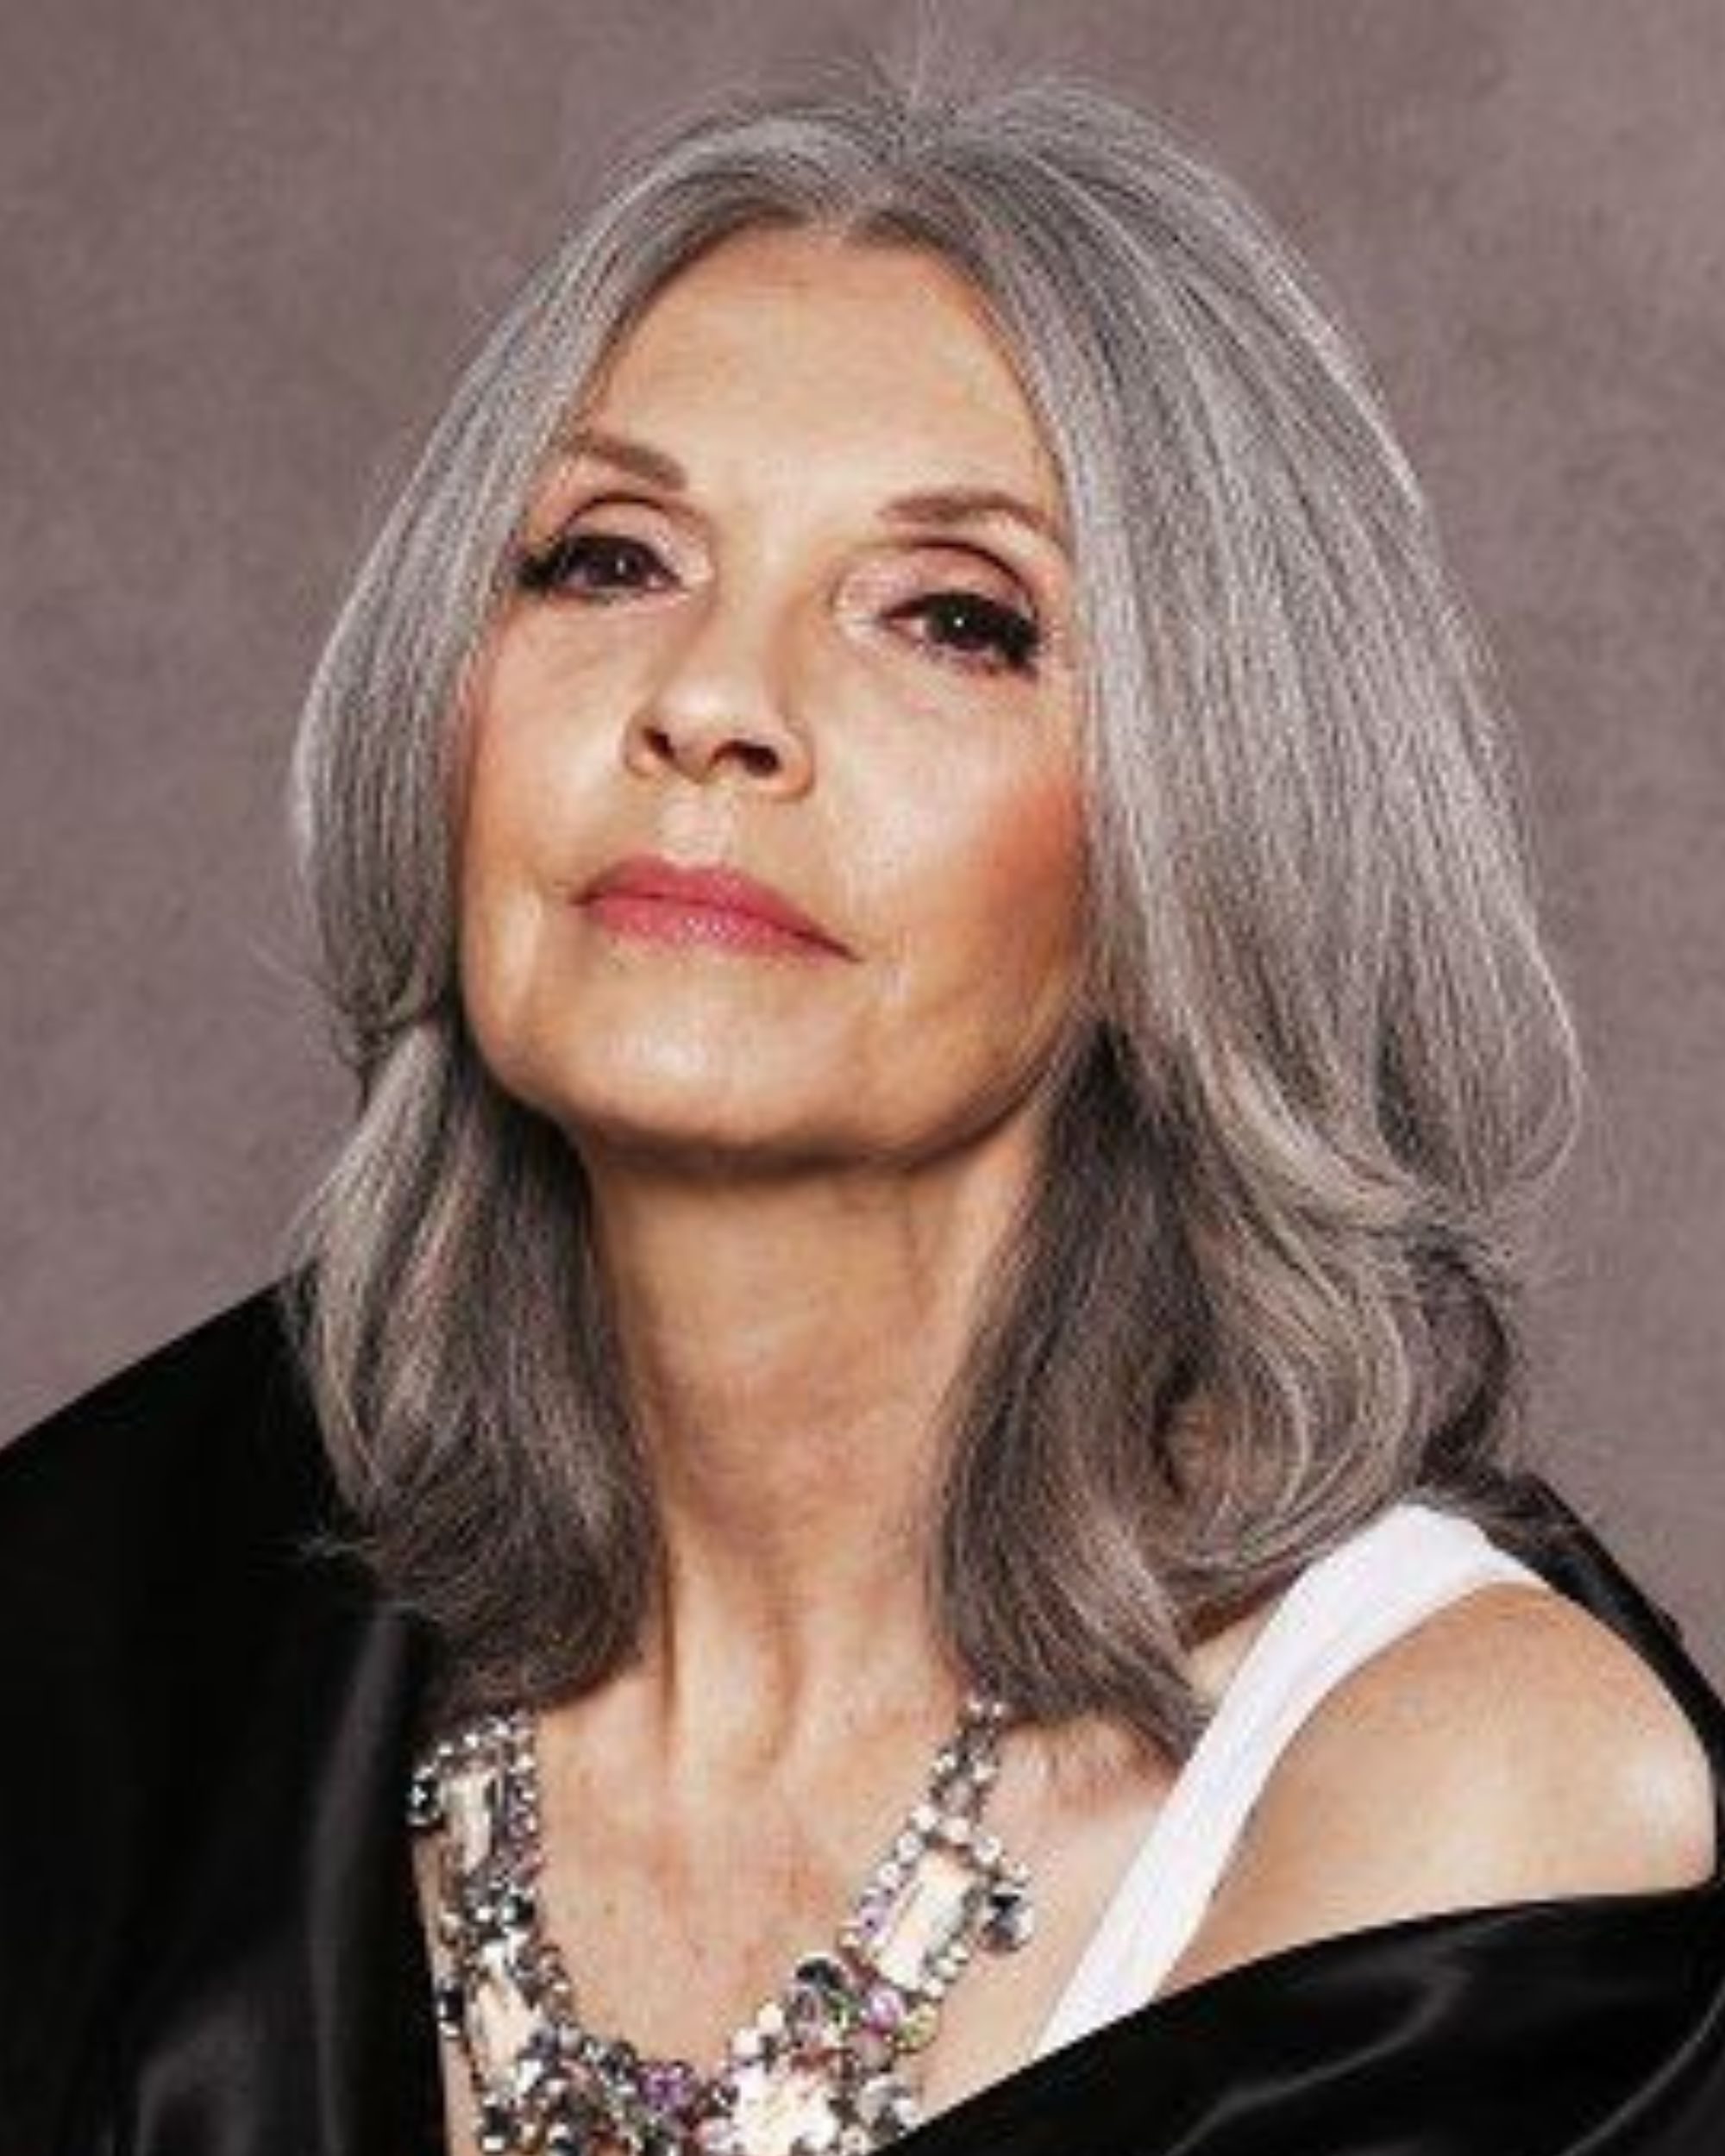 low maintenance hairstyles for 60 year old woman with fine hair